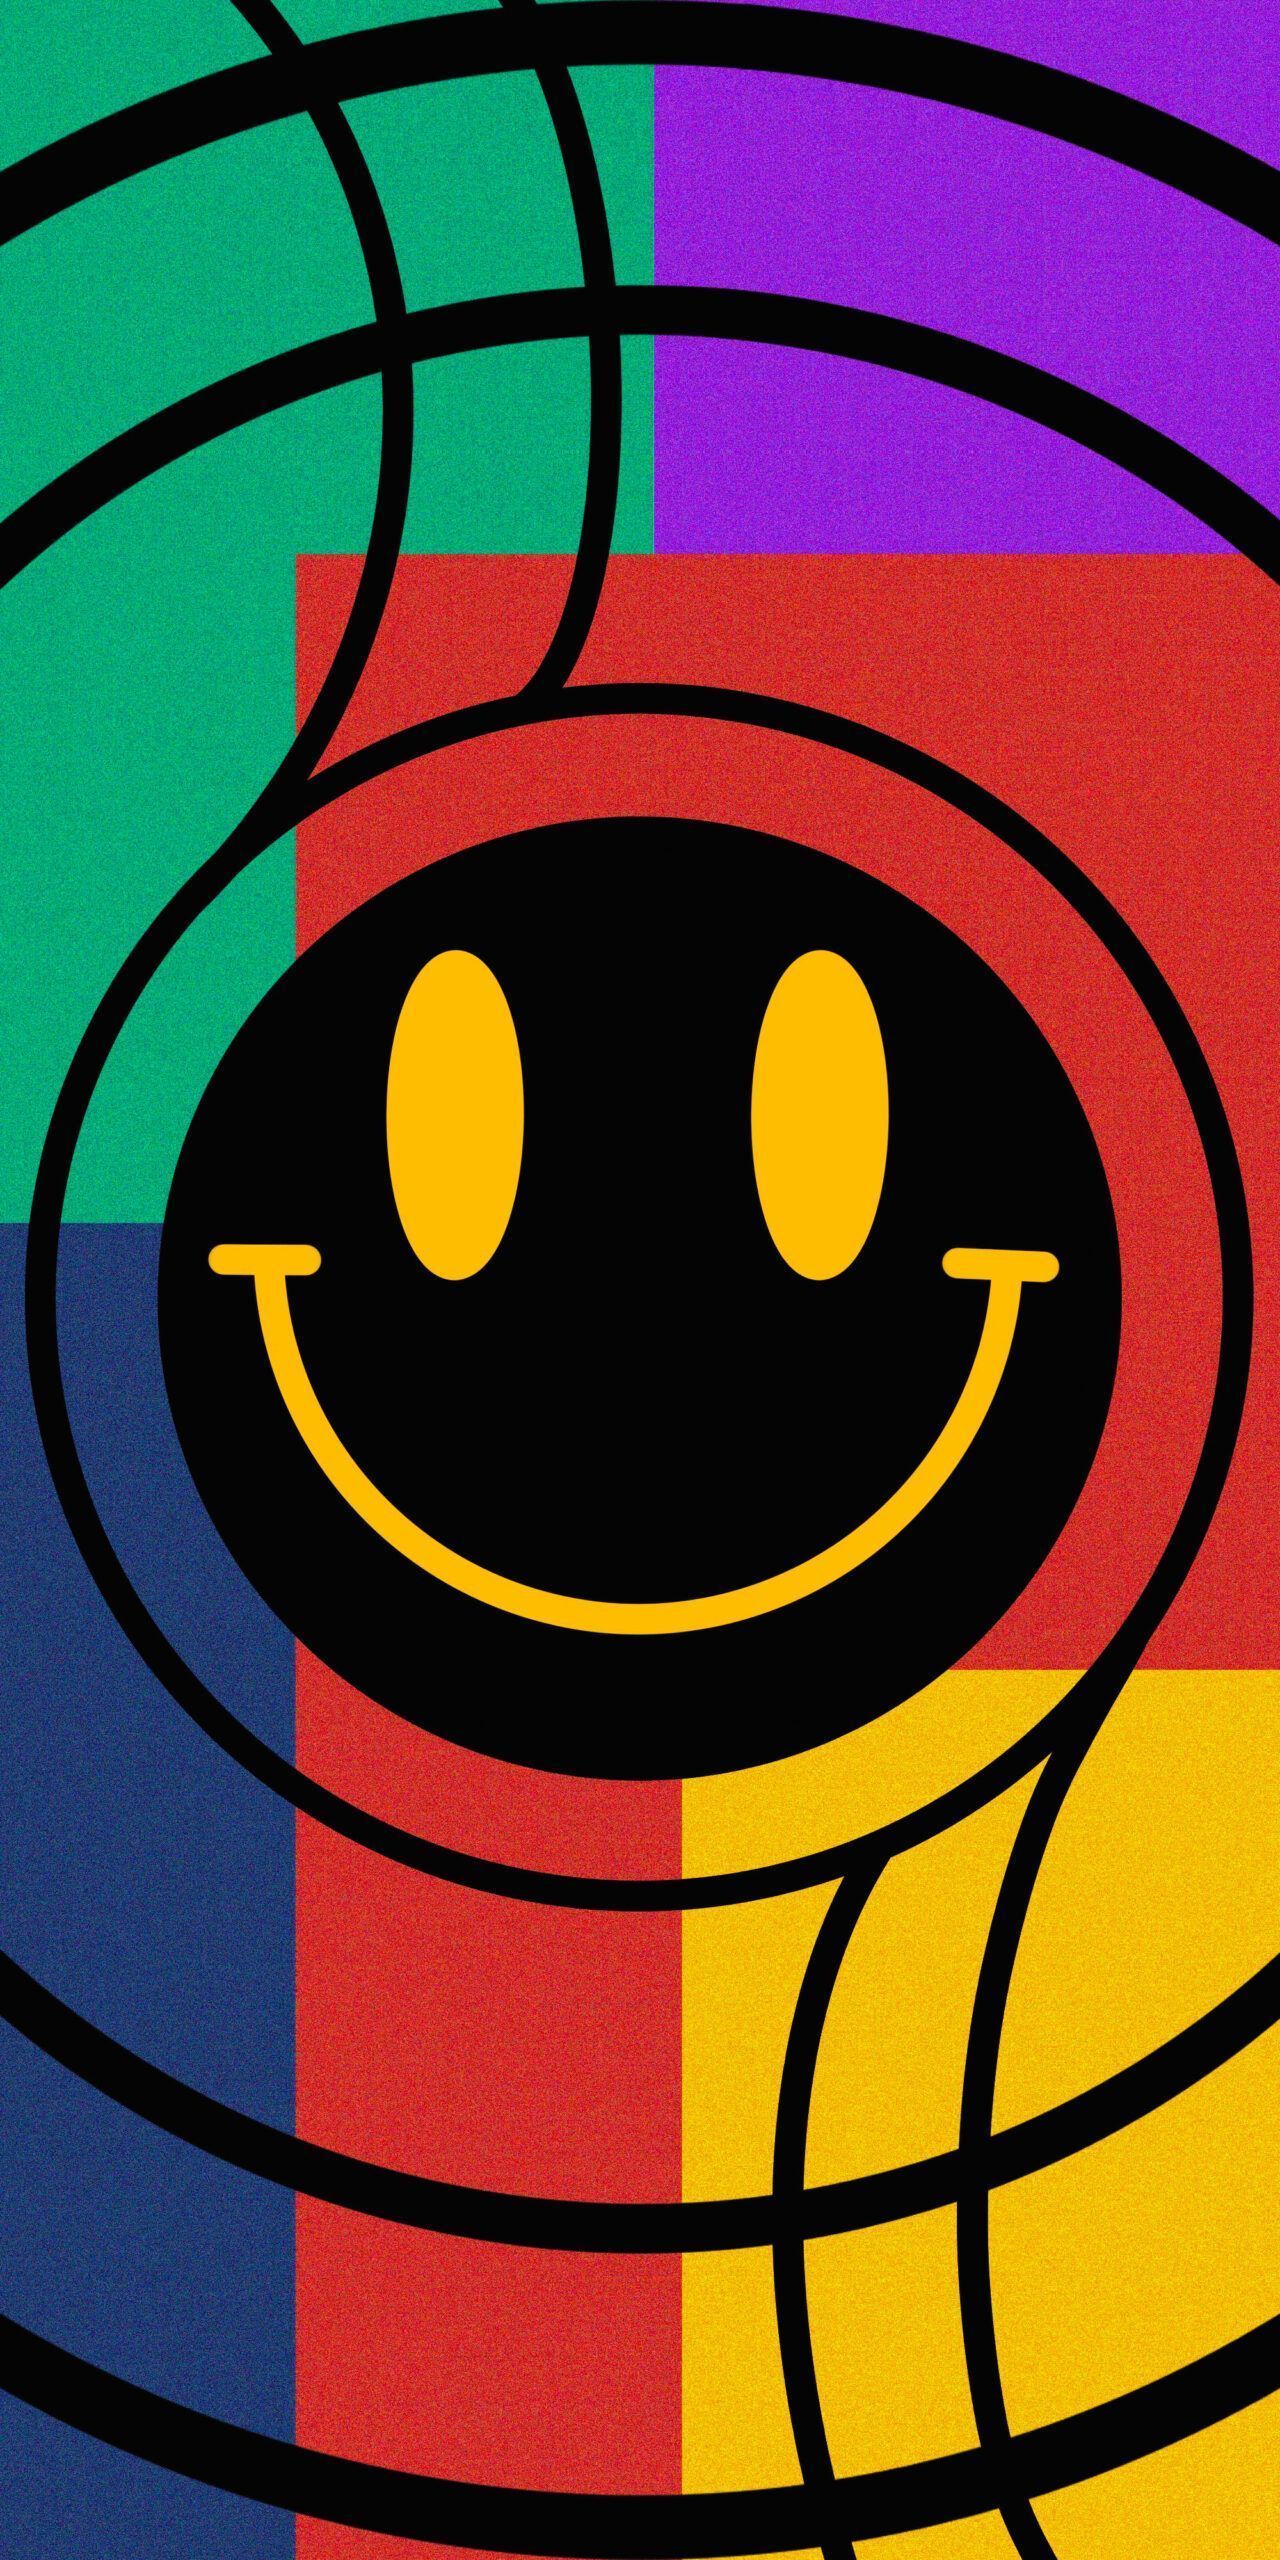 A smiley face with different colored lines around it - Smiley, abstract